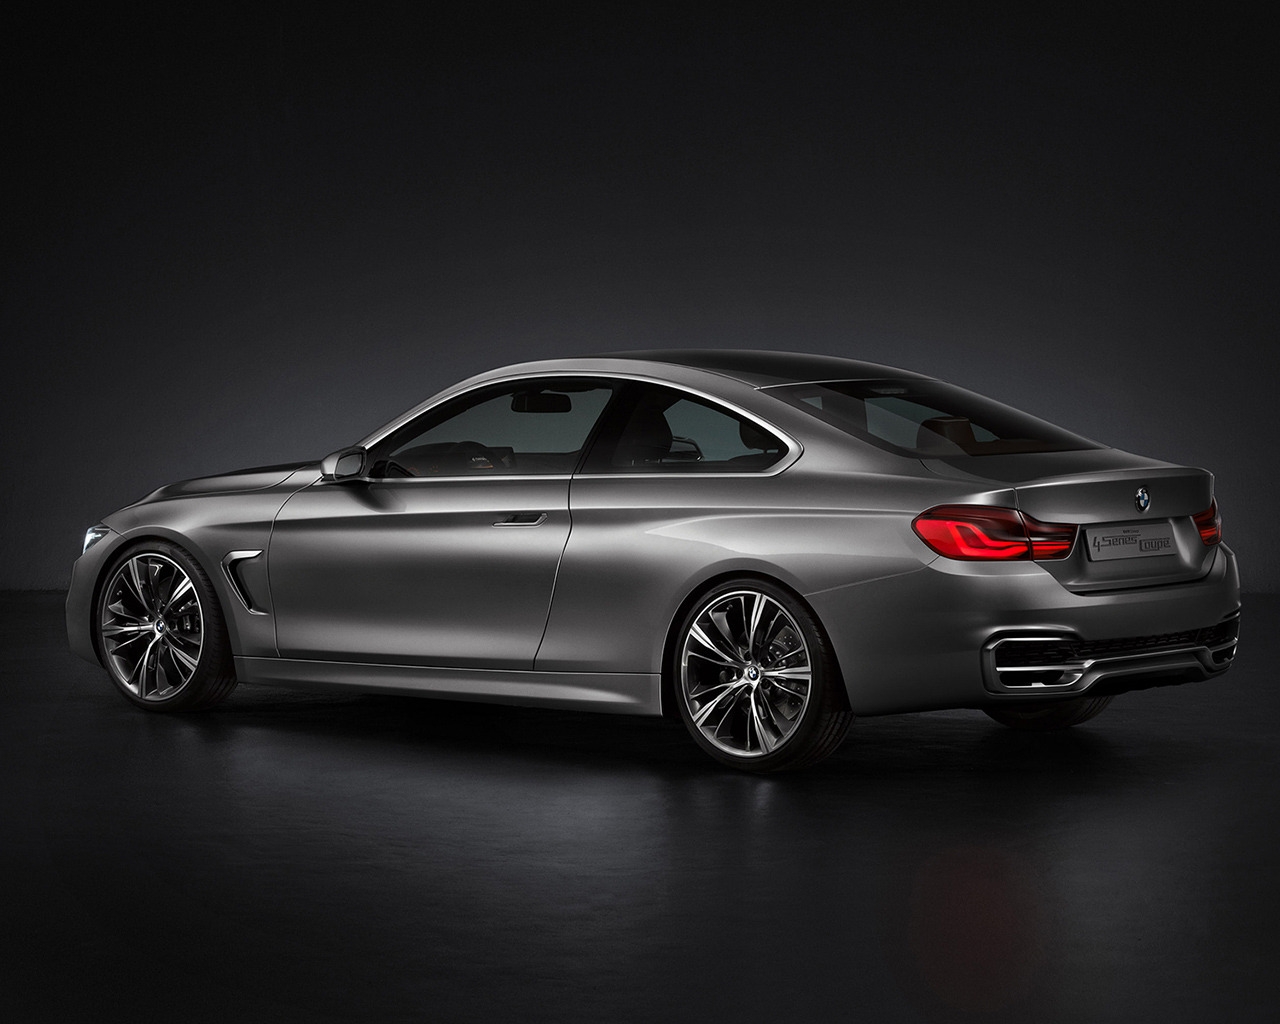 BMW 4 Series Coupe Concept Rear Studio for 1280 x 1024 resolution